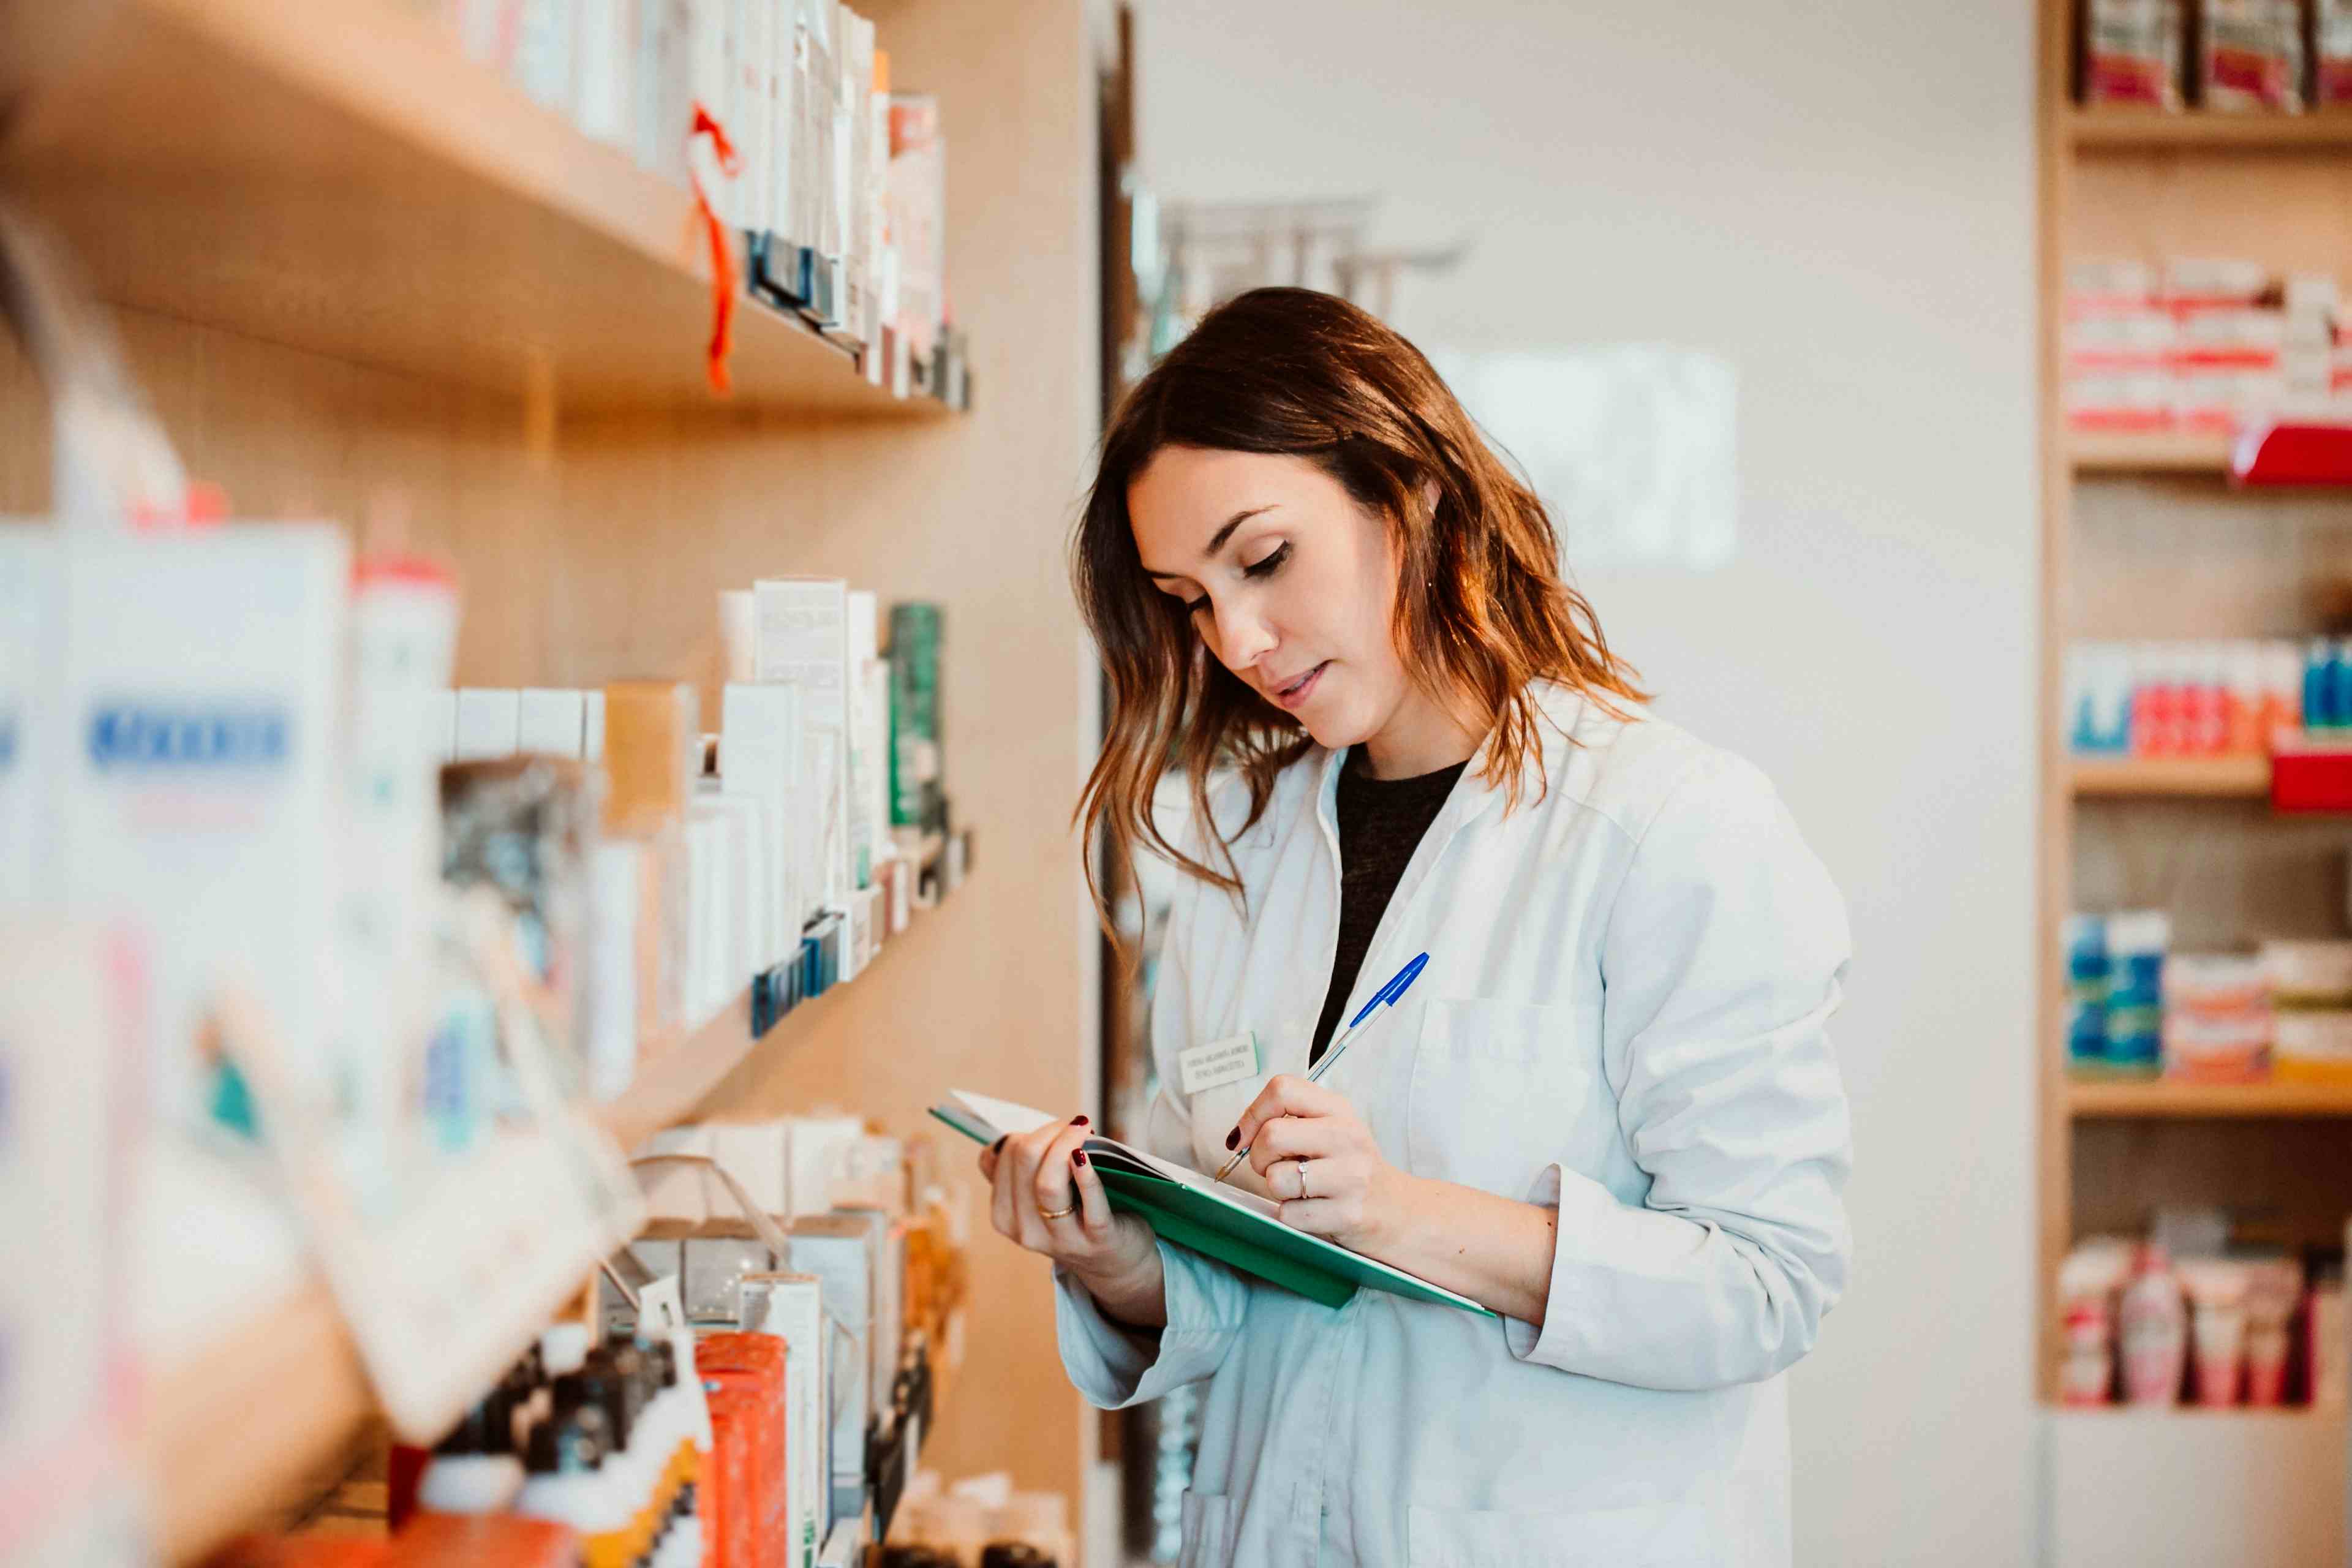 Young female pharmacist working in her large pharmacy. Placing medications, taking inventory. Lifestyle - Image credit: Lubero | stock.adobe.com